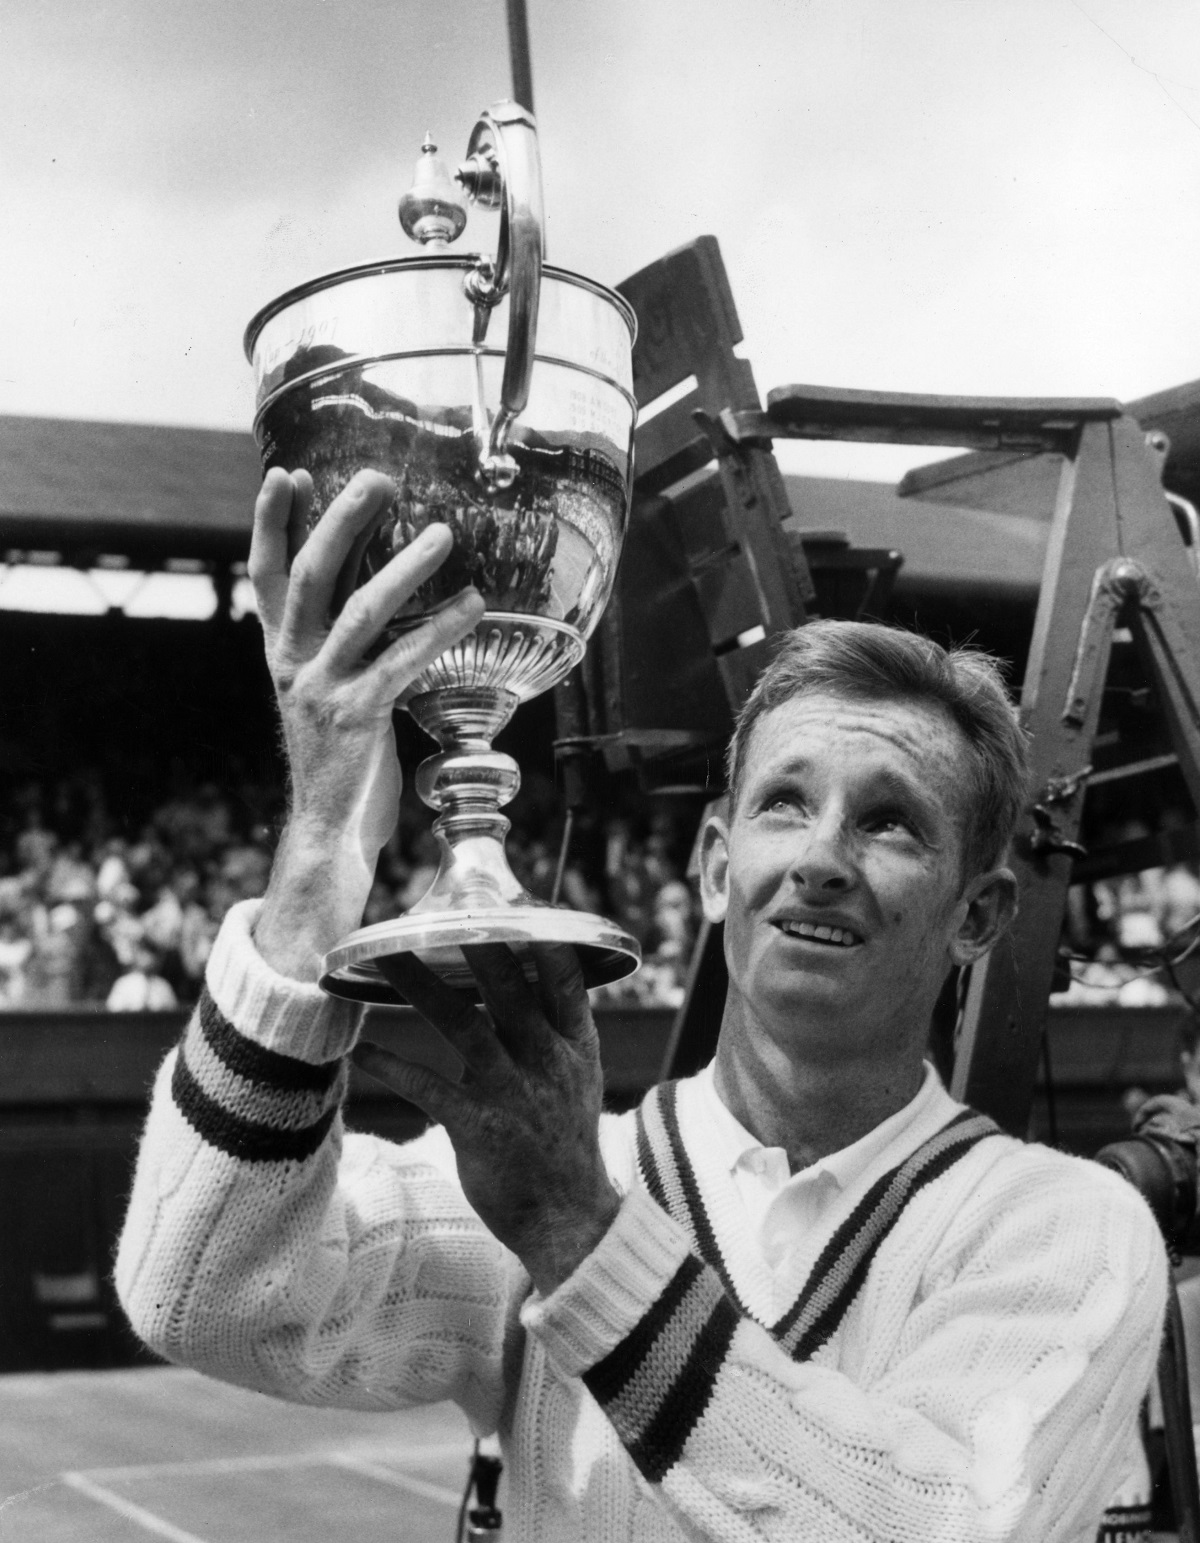 7th July 1961:  Australian tennis player Rod Laver proudly holding the Men's Singles Trophy at Wimbledon, after defeating Chuck McKinley.  (Photo by Douglas Miller/Keystone/Getty Images)